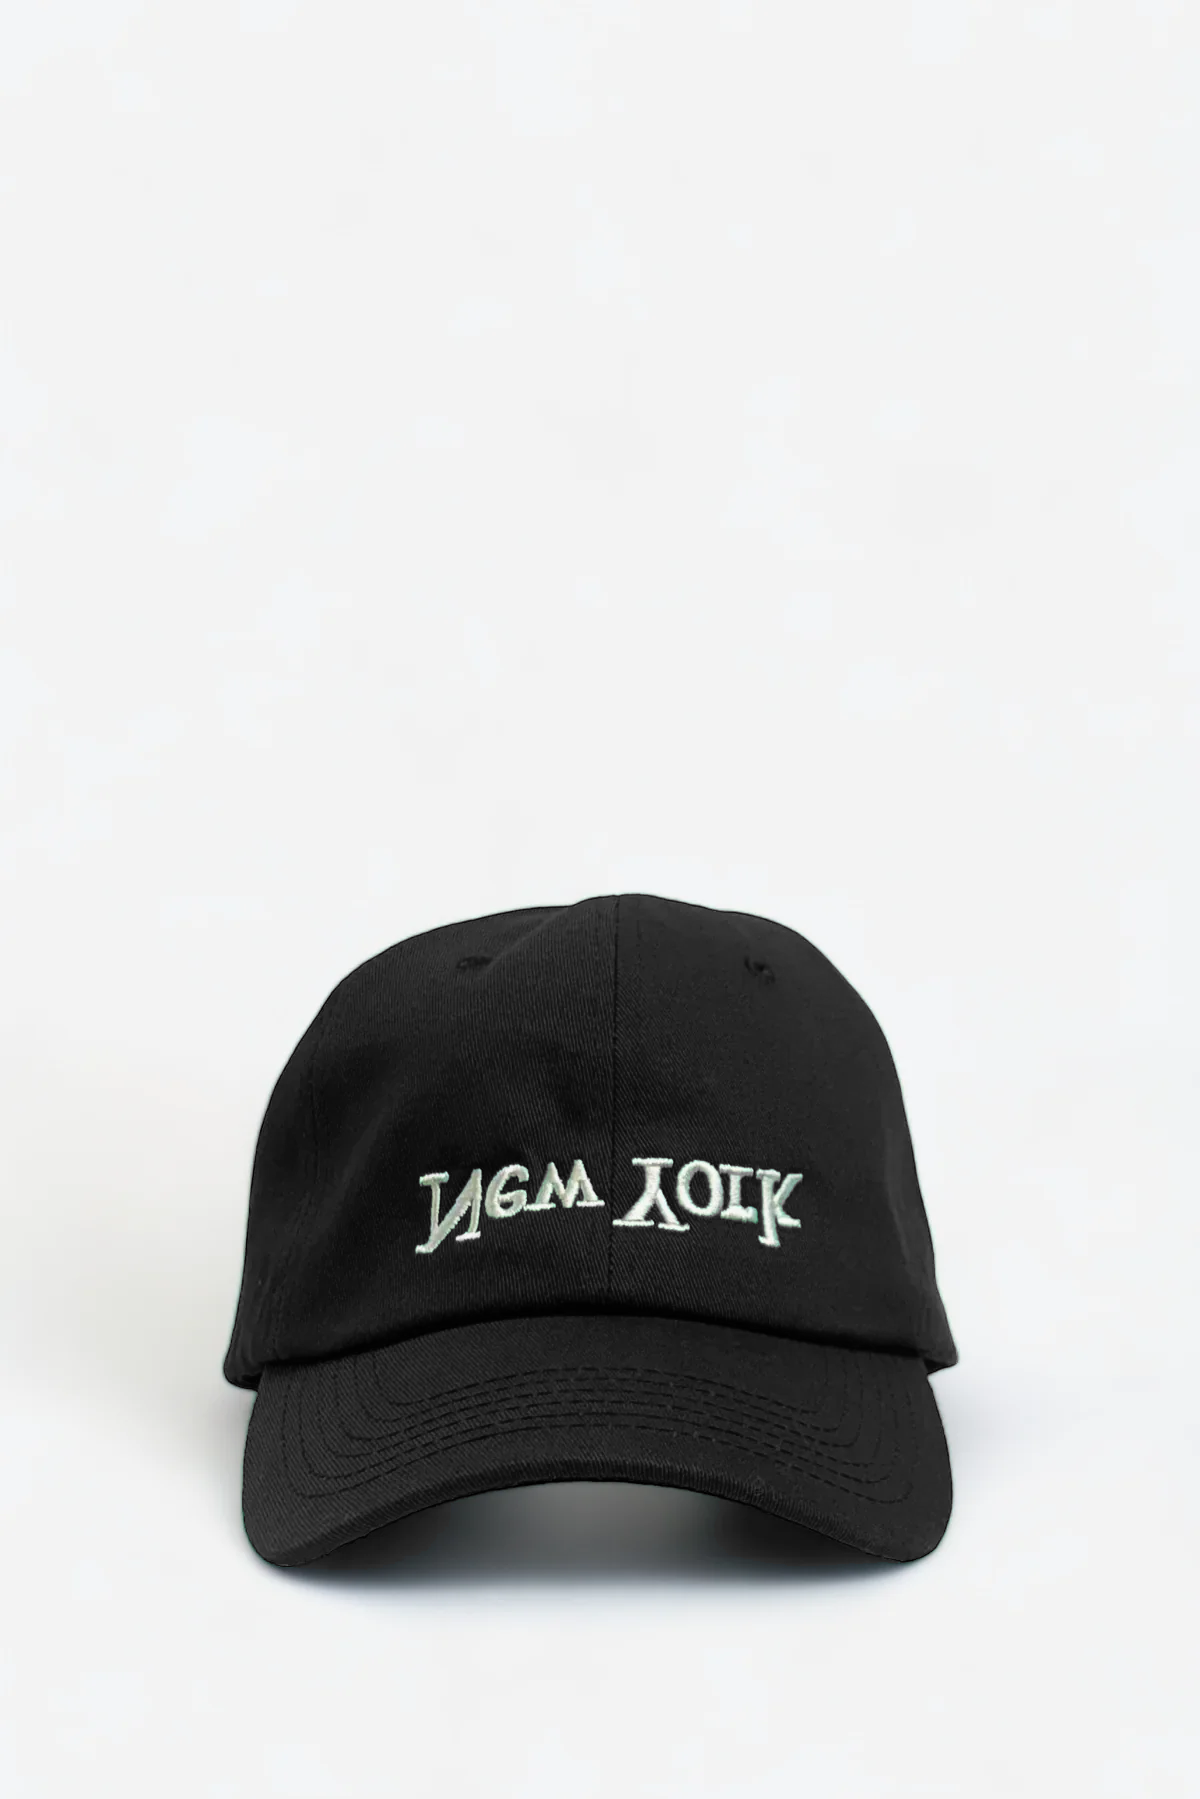 New York Embroidered Hat - Black/White - Assembly New York | Assembly ...